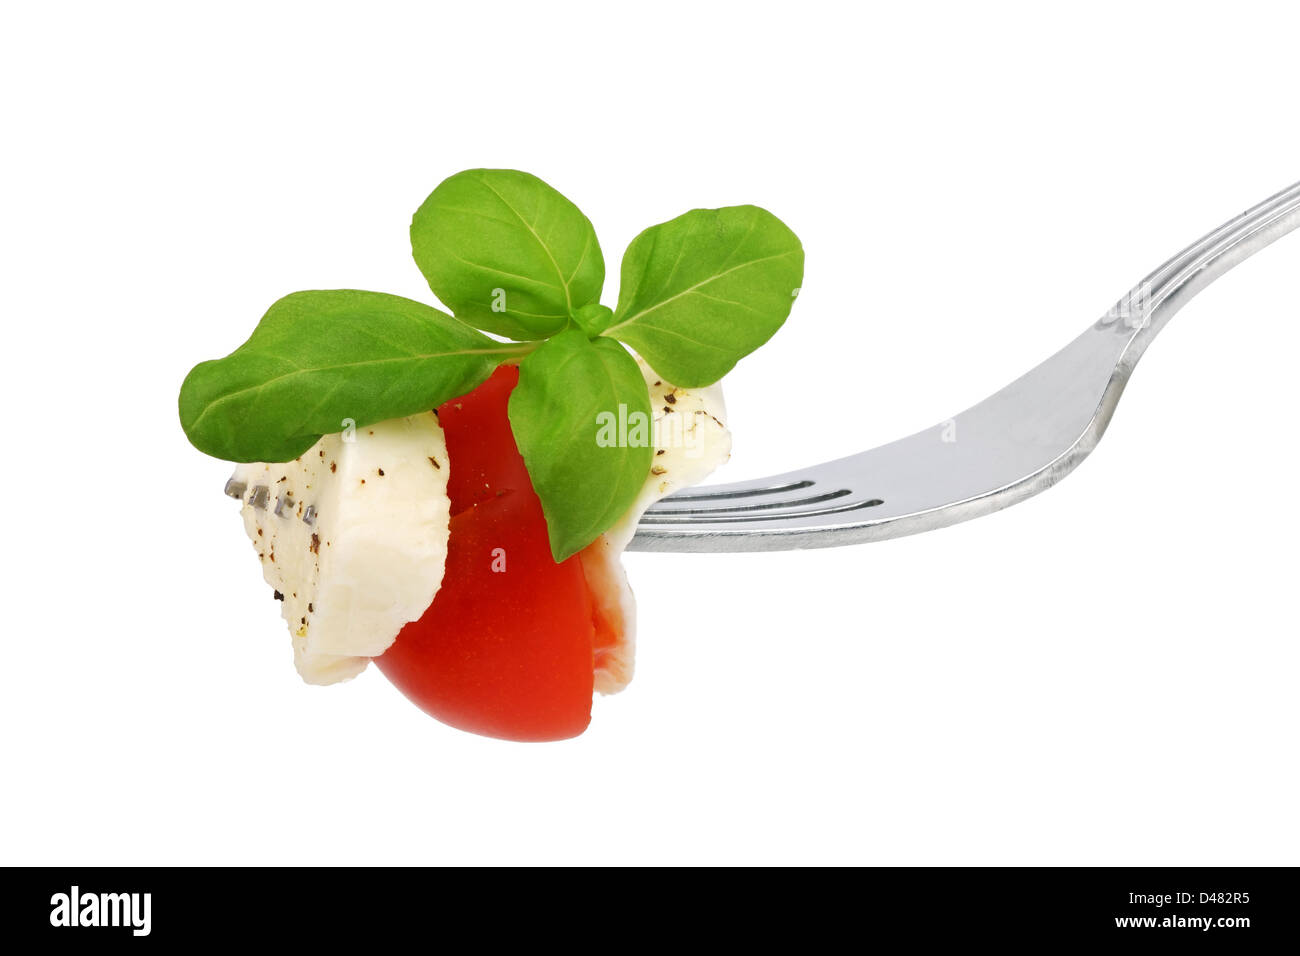 Italian salad on a fork on white background Stock Photo